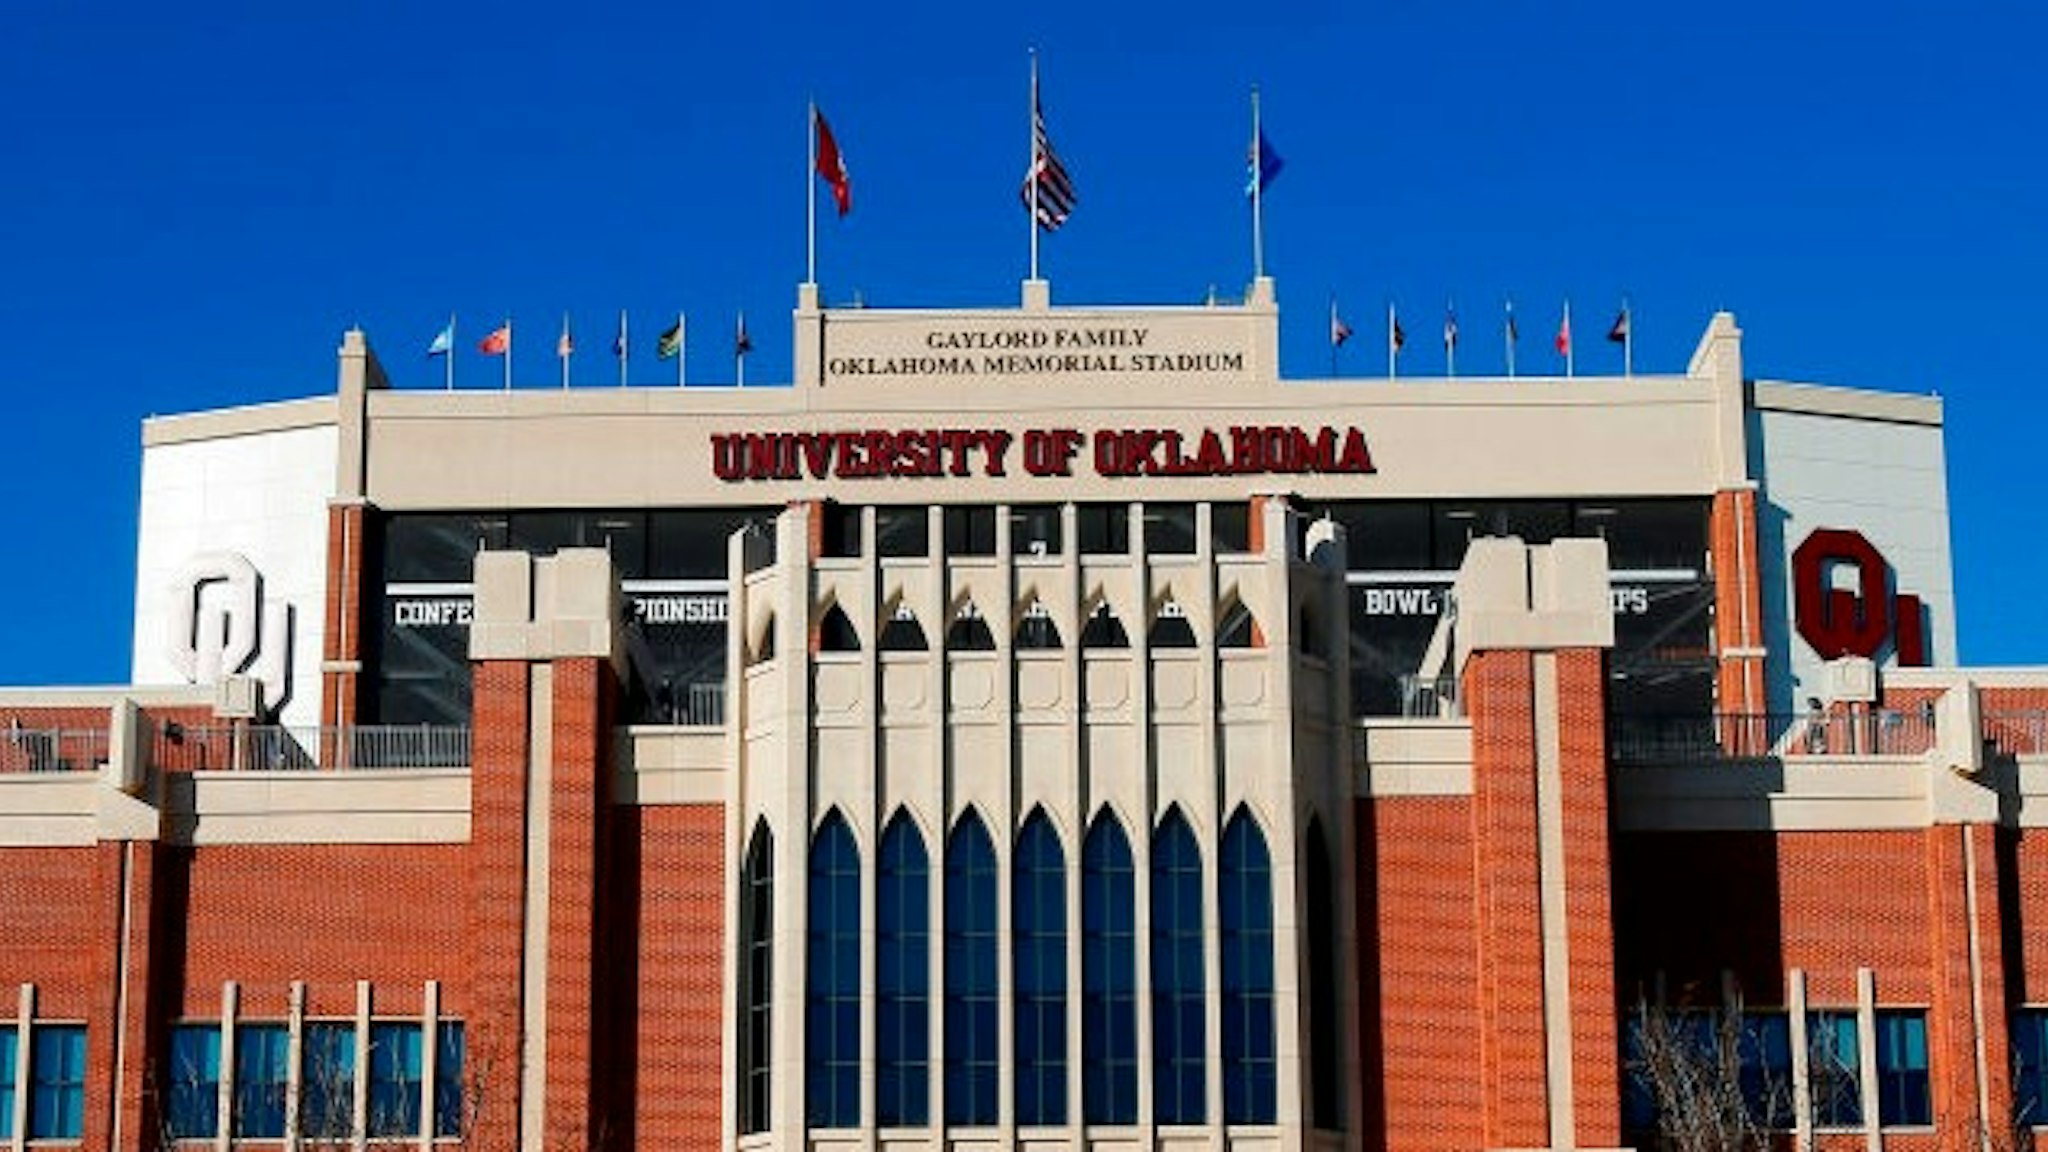 The Gaylord Family Oklahoma Memorial Stadium, home of the Oklahoma Sooners, is ready for a game against the Iowa State Cyclones on November 9, 2019 at in Norman, Oklahoma. OU held on to win 42-41. (Photo by